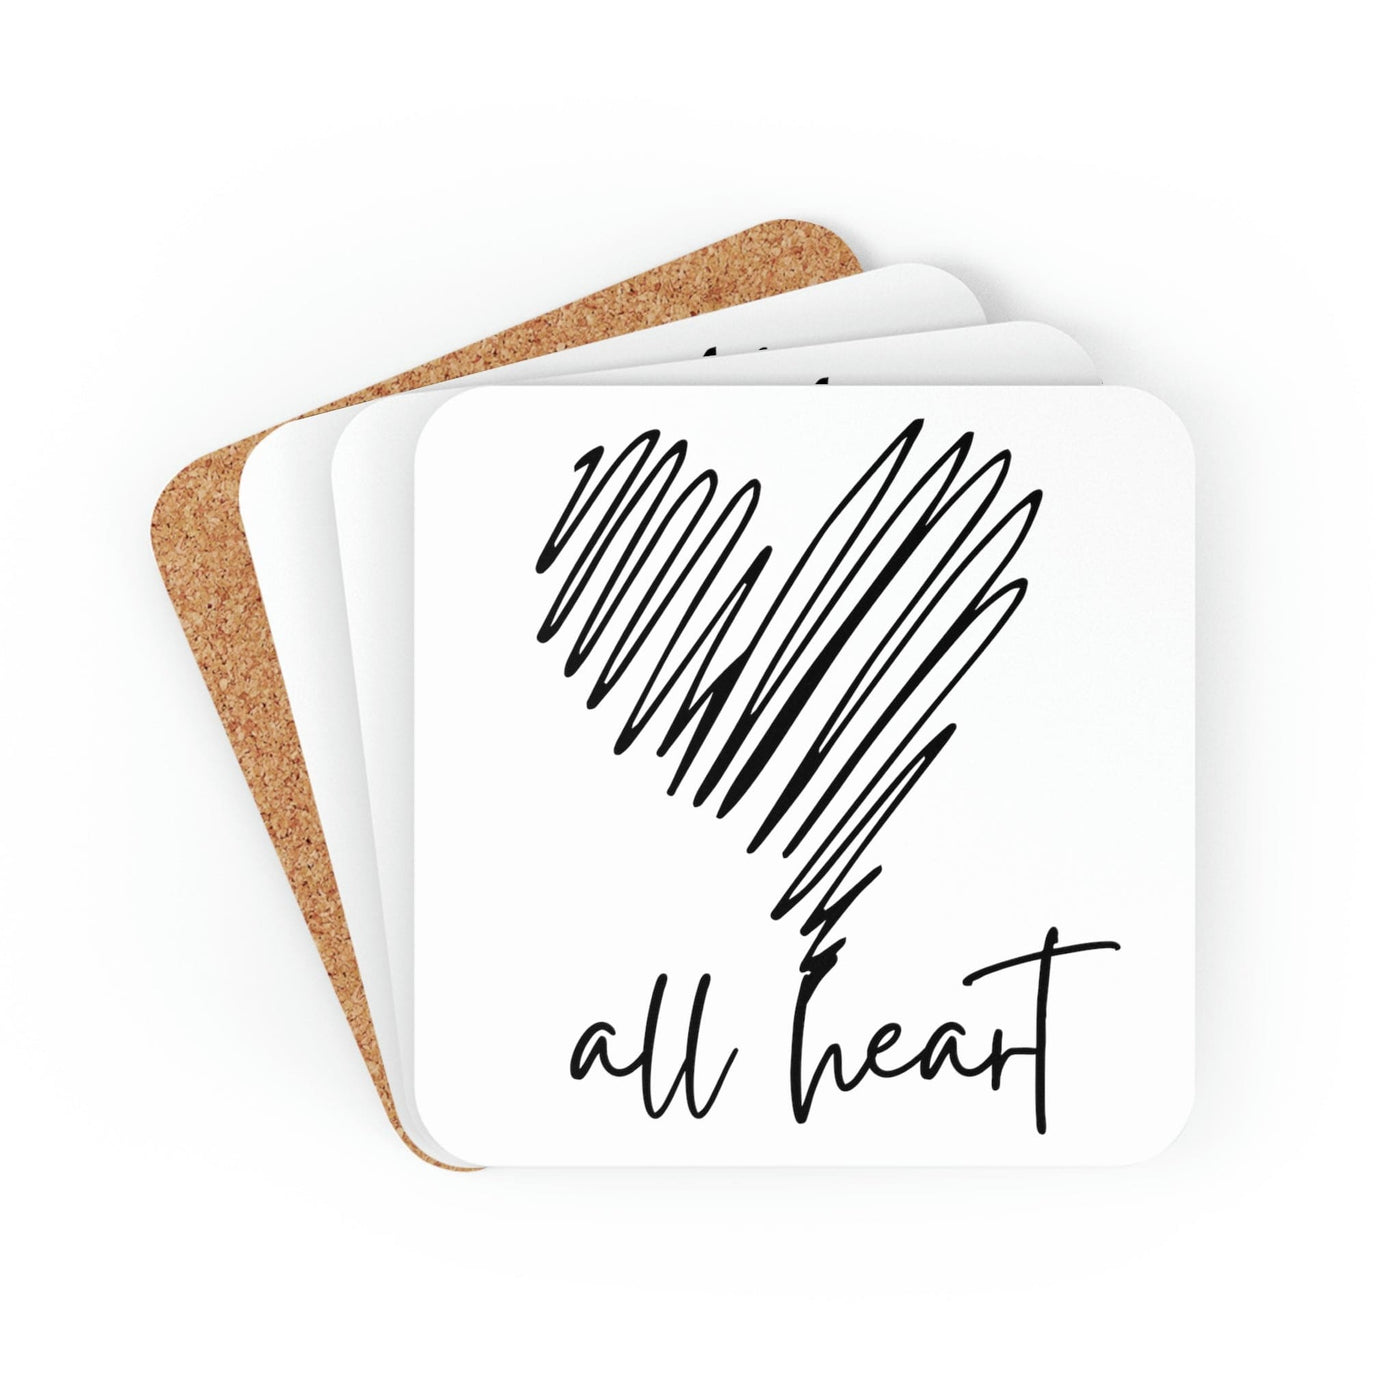 Home Decor Coaster Set - 4 Piece Home/office Say It Soul All Heart Black Line